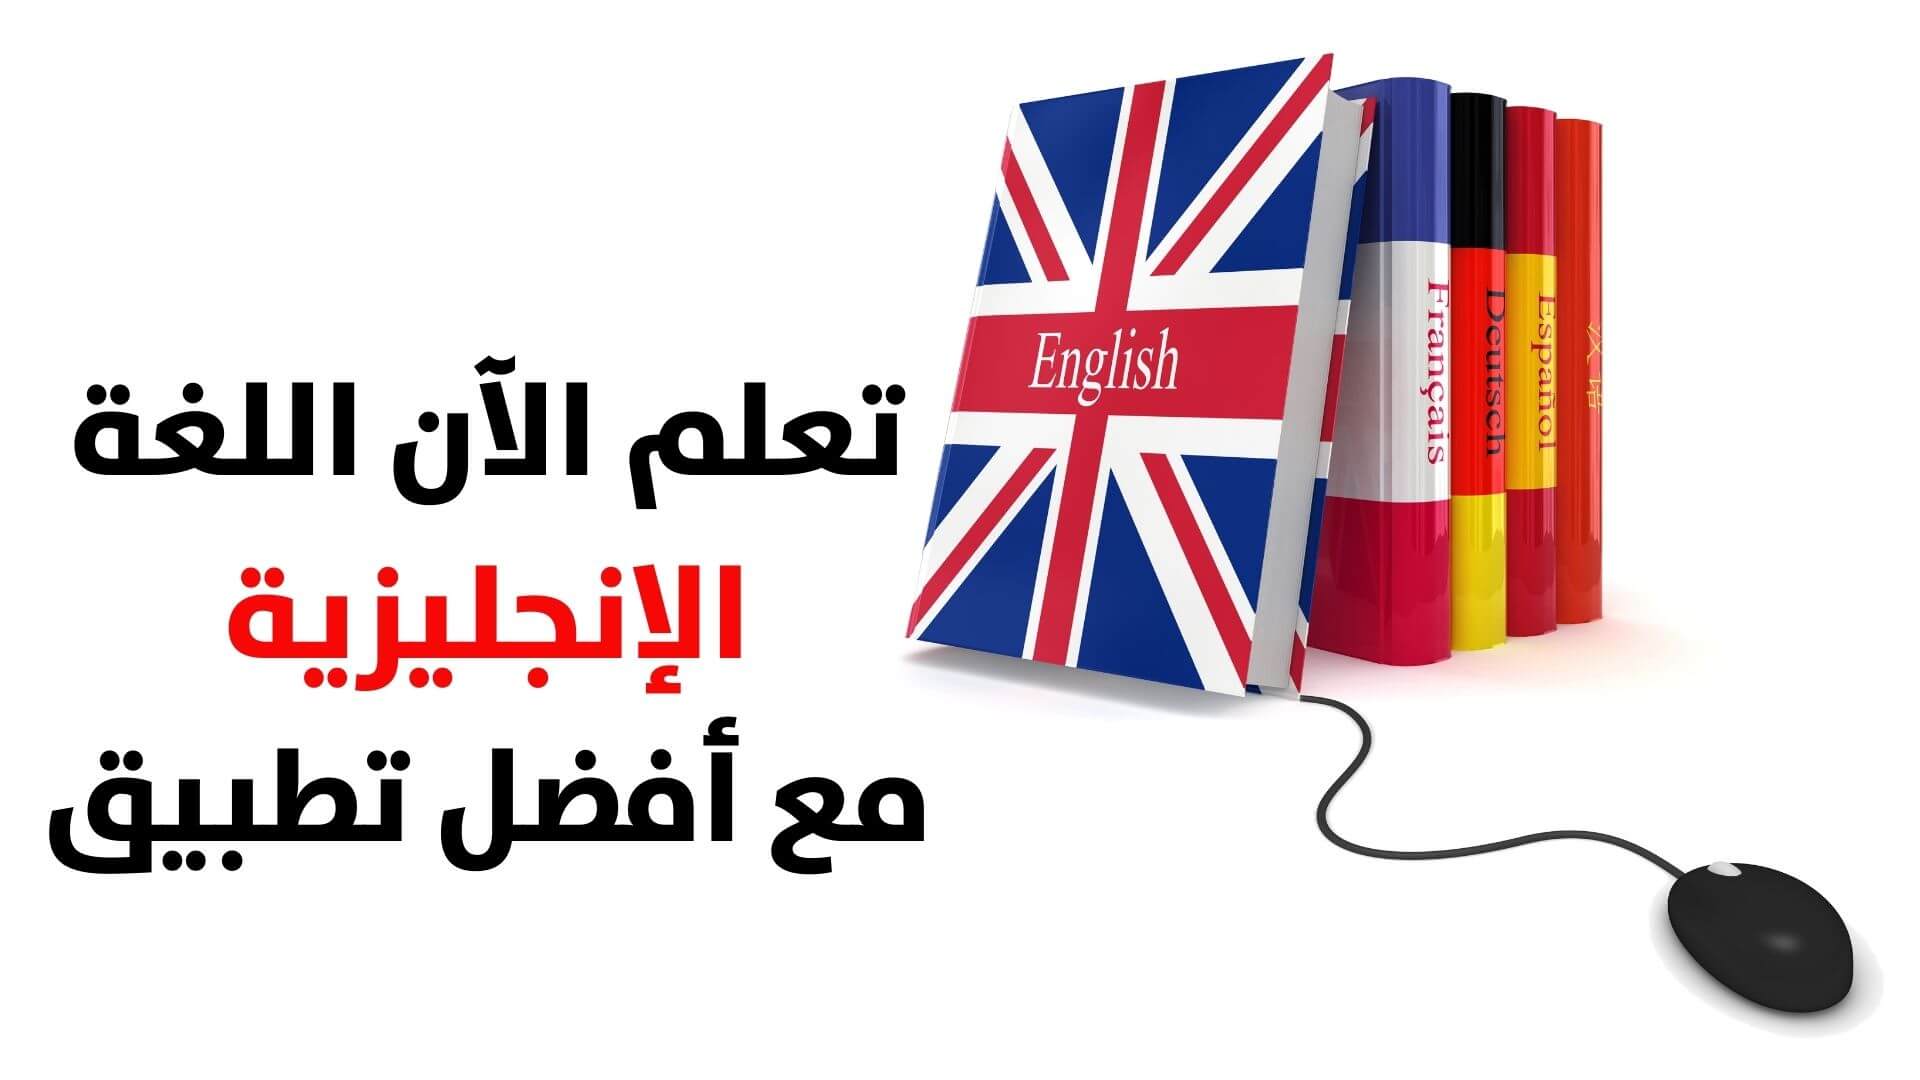 learn English online